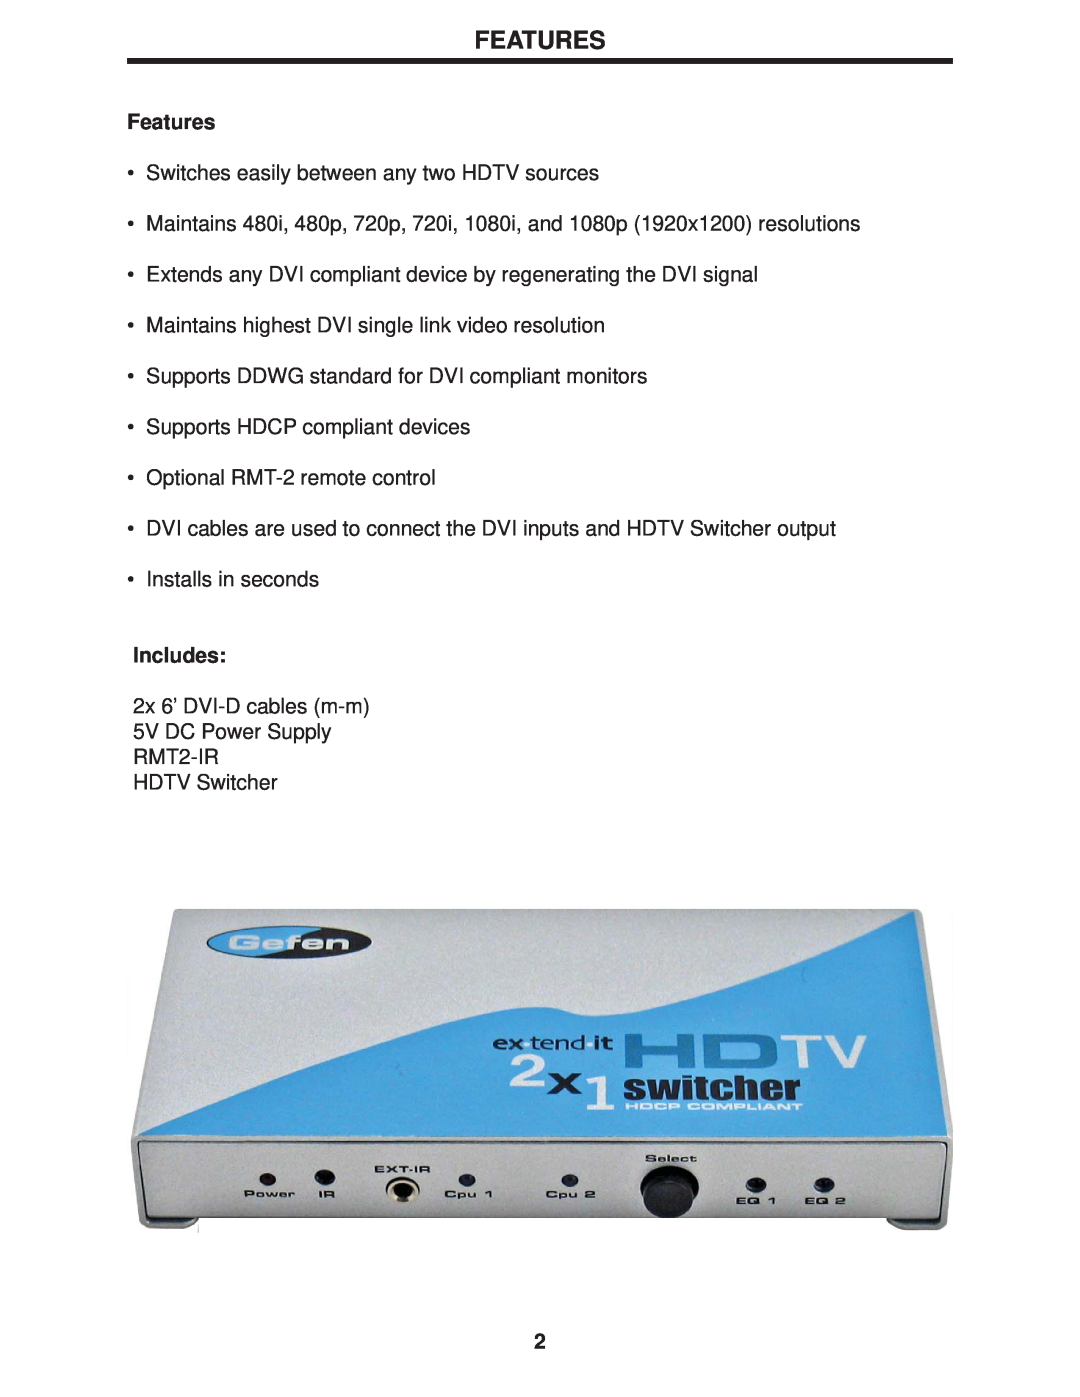 Gefen HDTV Switcher user manual Features, Includes 